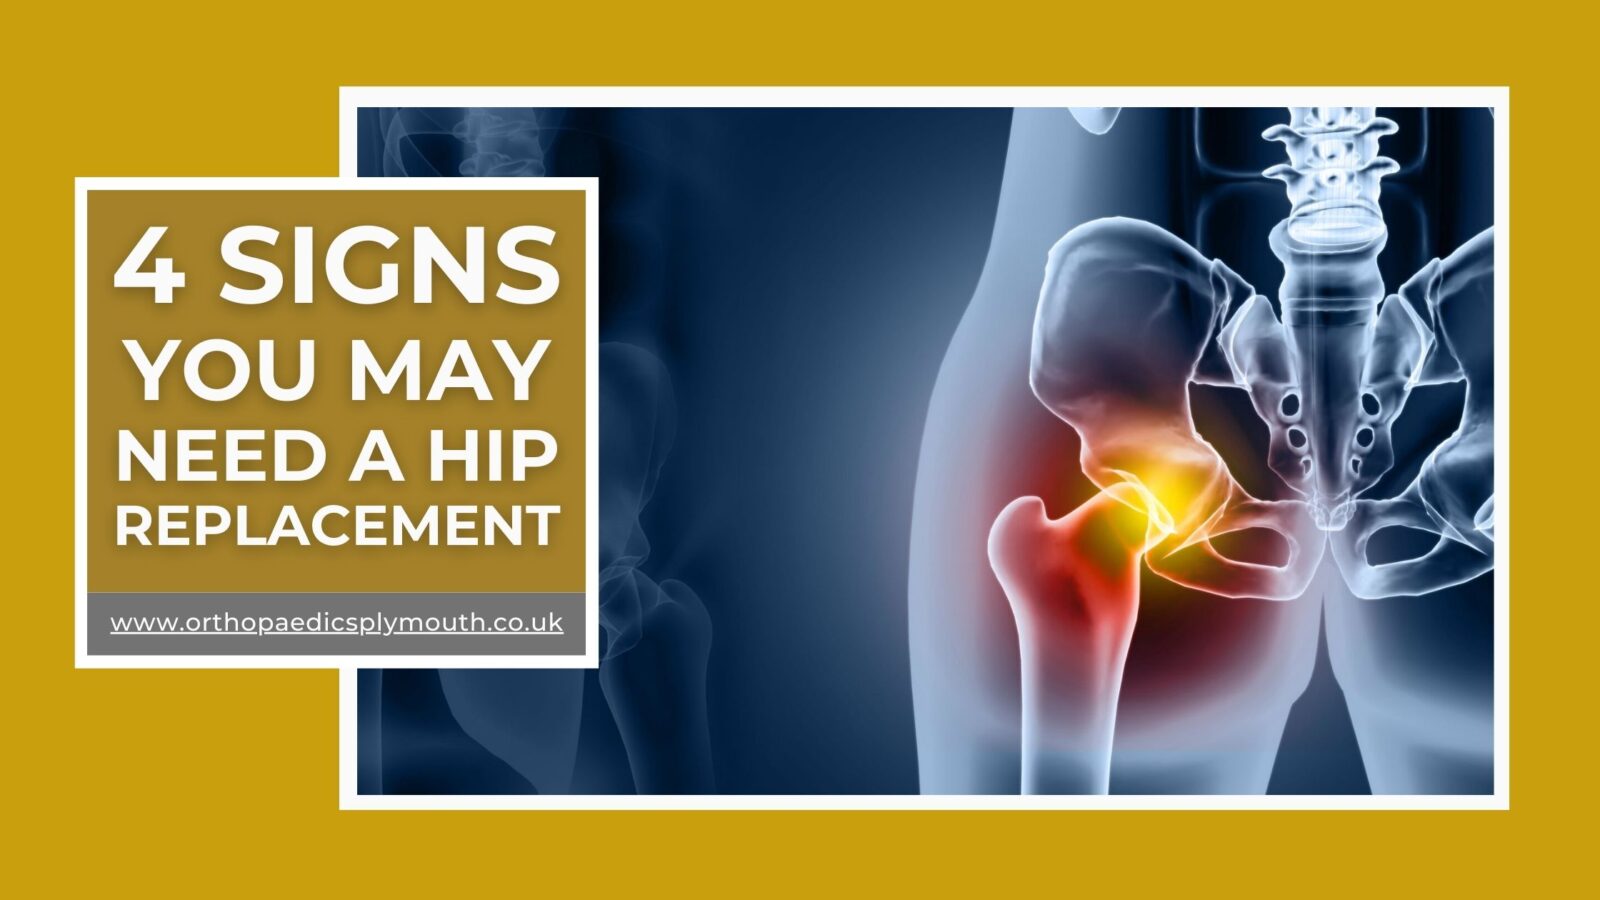 4 Signs You May Need a Hip Replacement